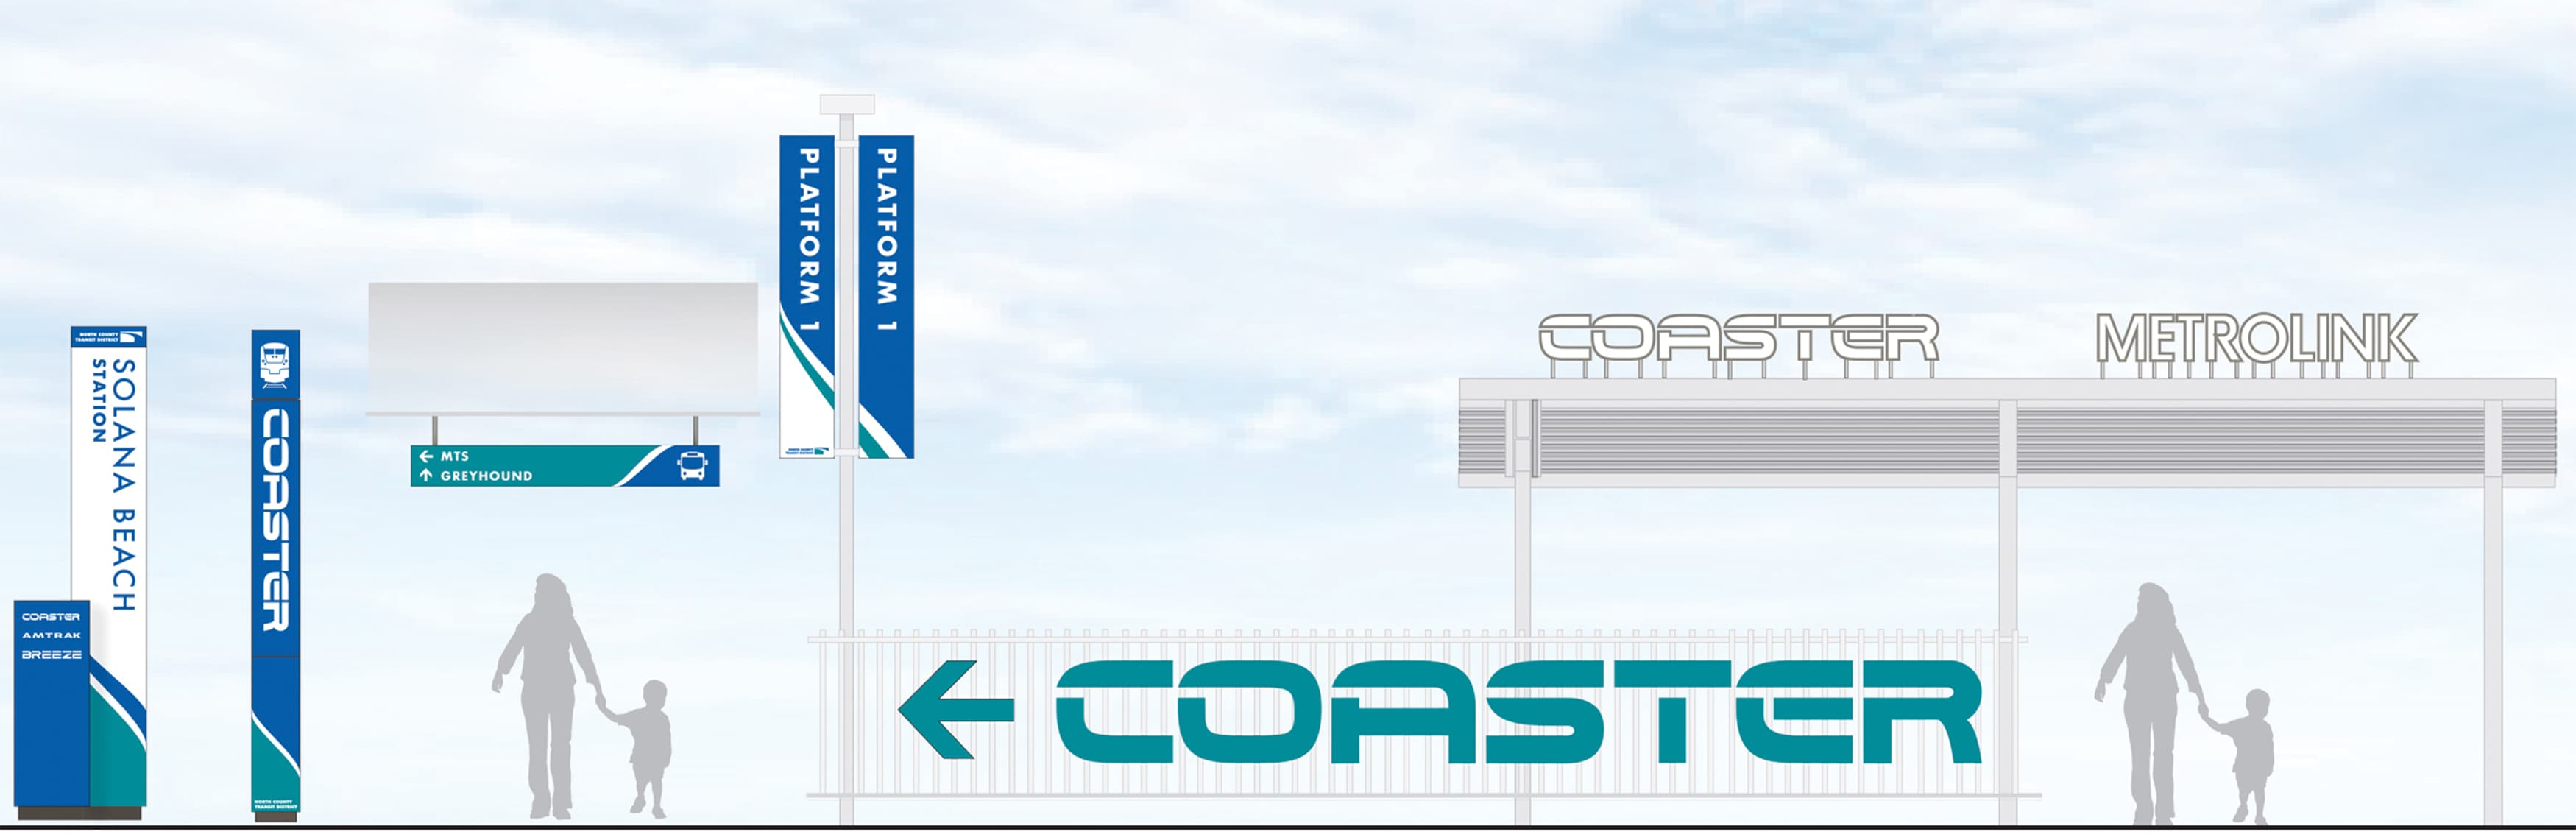 North County Transit District, the transit system in northern San Diego, California, worked with RSM Design to re-think what their transit system looks like. Light-rail wayfinding system.